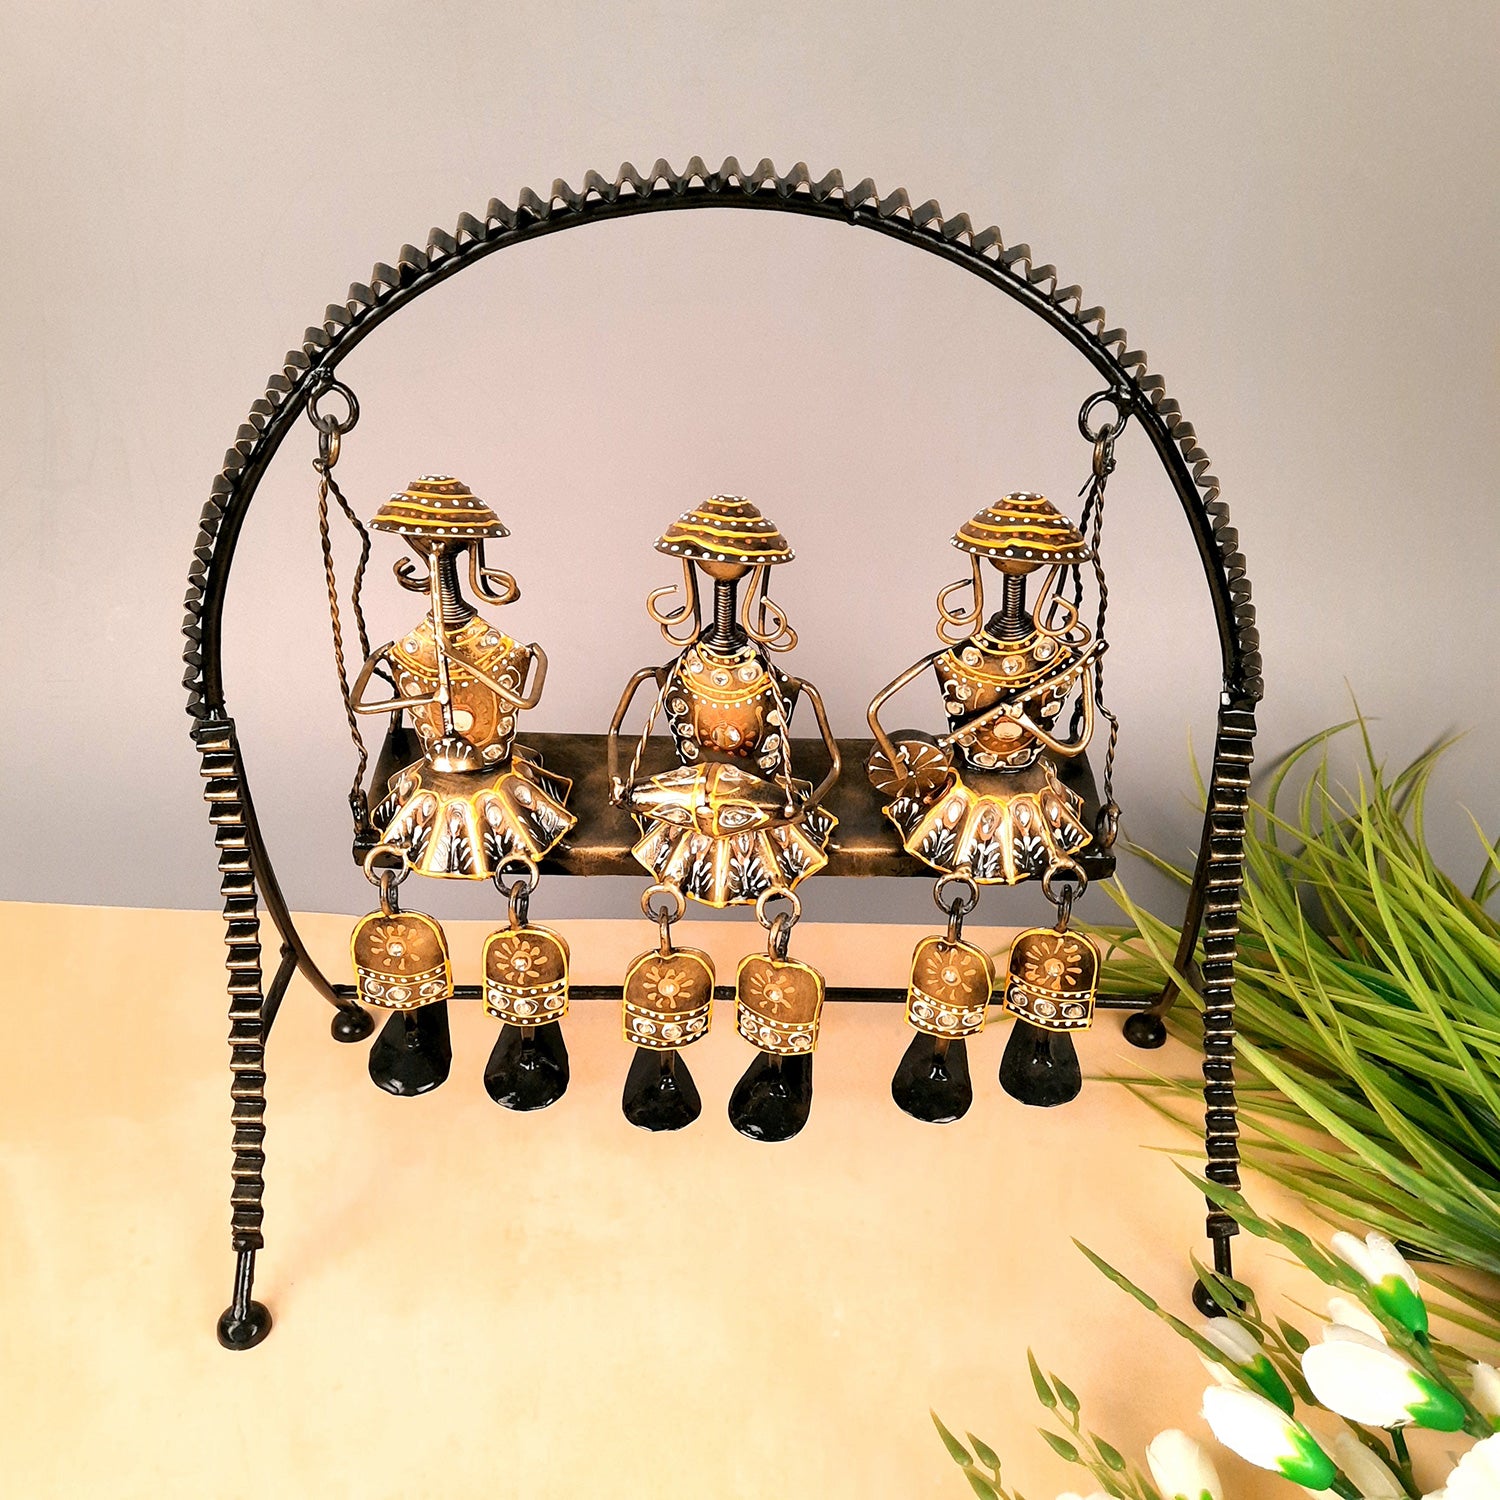 Musician Showpiece Sitting On Swing Design | Decorative Figurines With Hanging Legs - for Home, Bedroom, Living Room, Office Desk & Table Decor | Gifts For Wedding, Housewarming & Festivals - 15 Inch - Apkamart